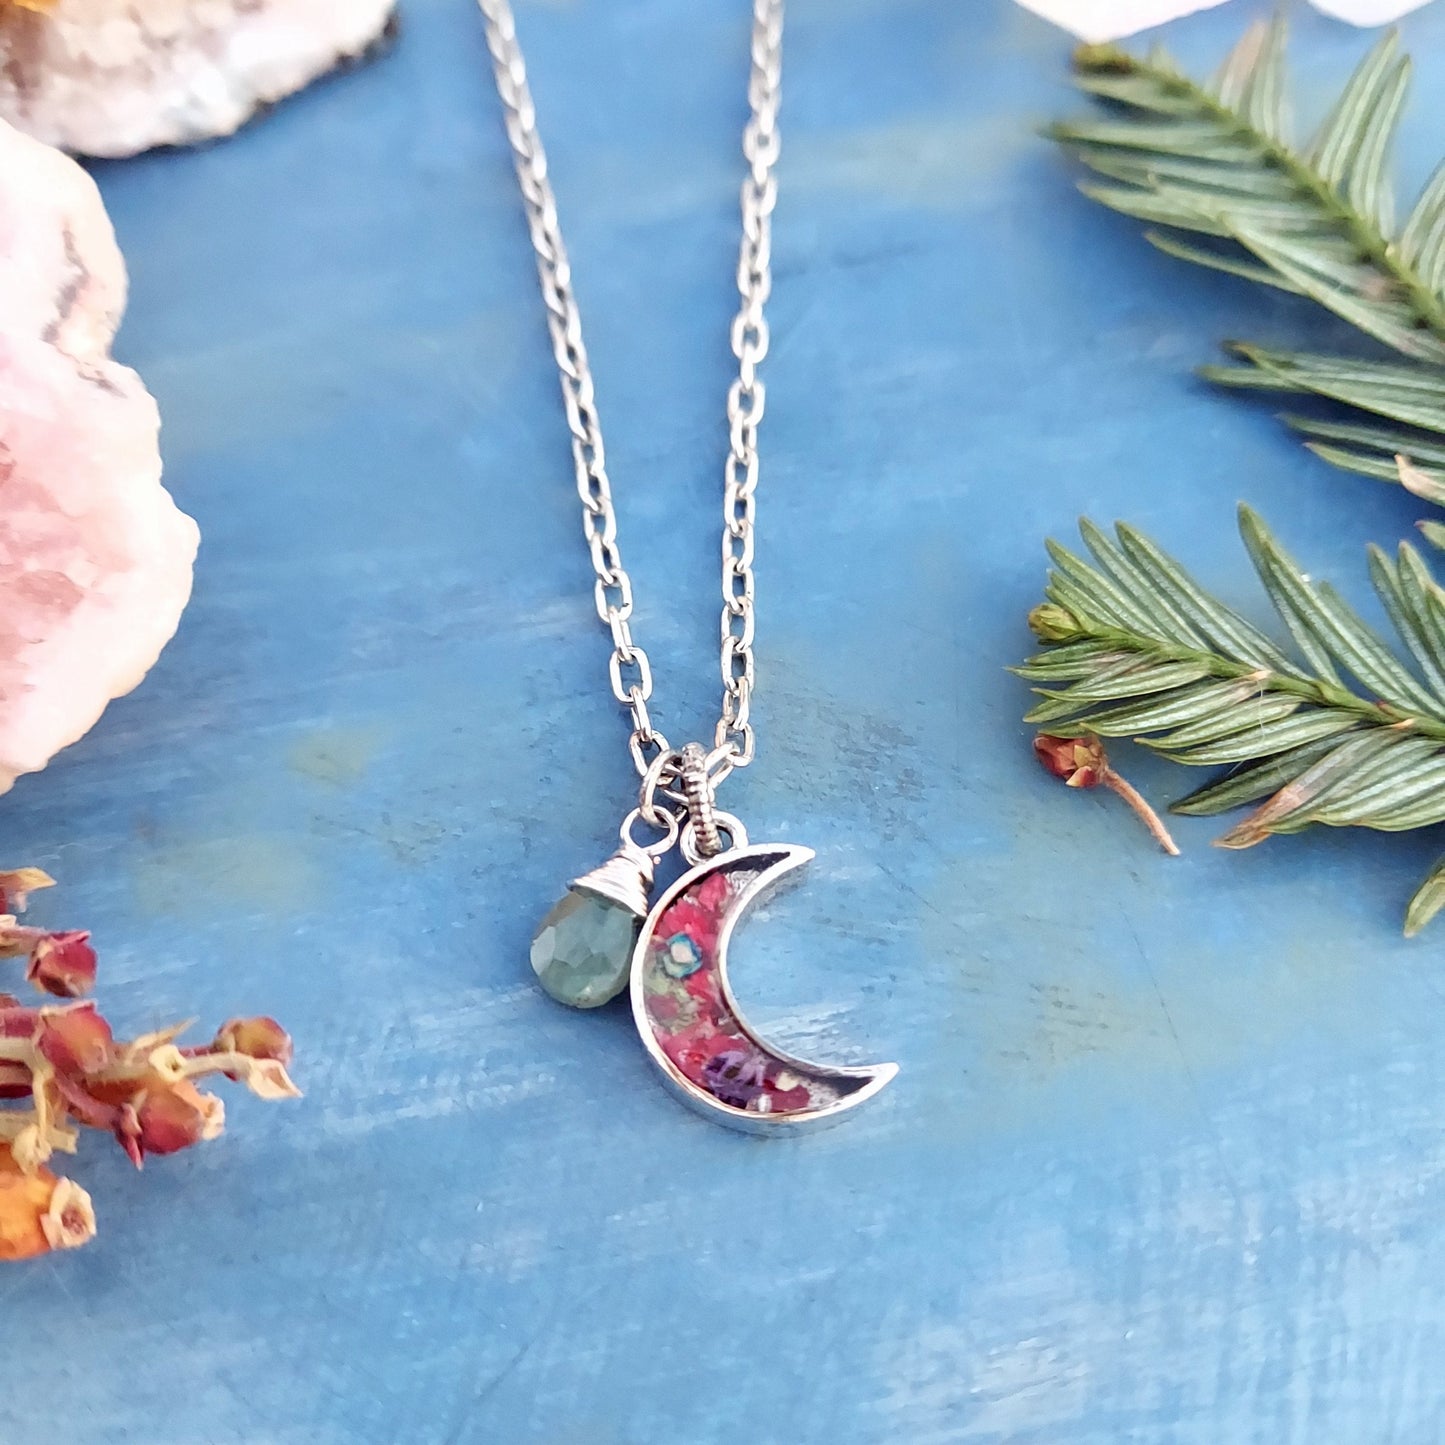 Silver Floral Moon Charm Necklace with Aquamarine